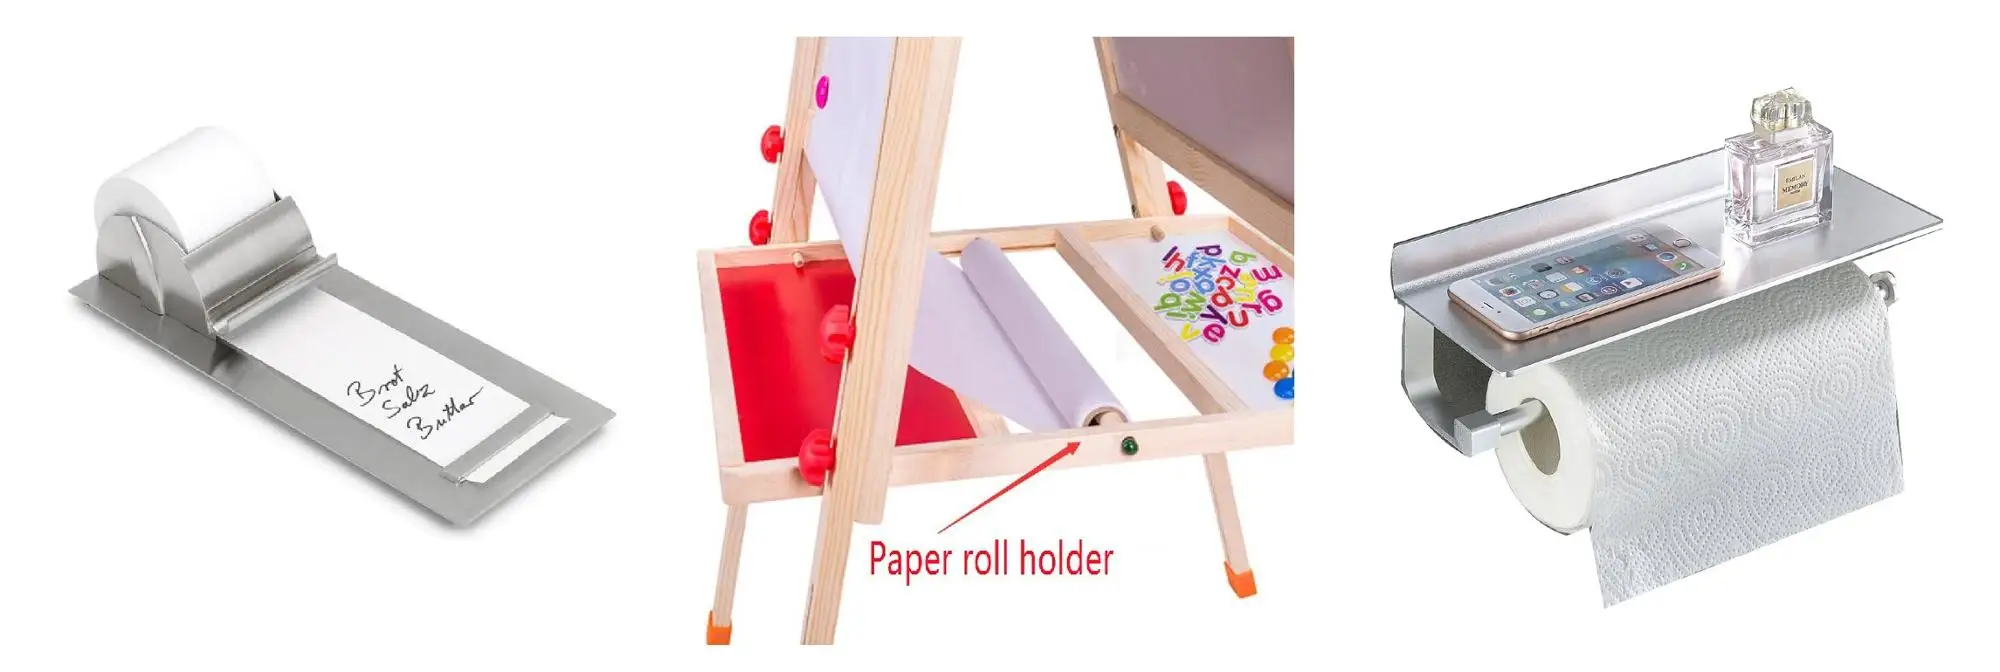 Grey Heavy Steel  and Wood Paper Cutter Roll Holder Dispenser